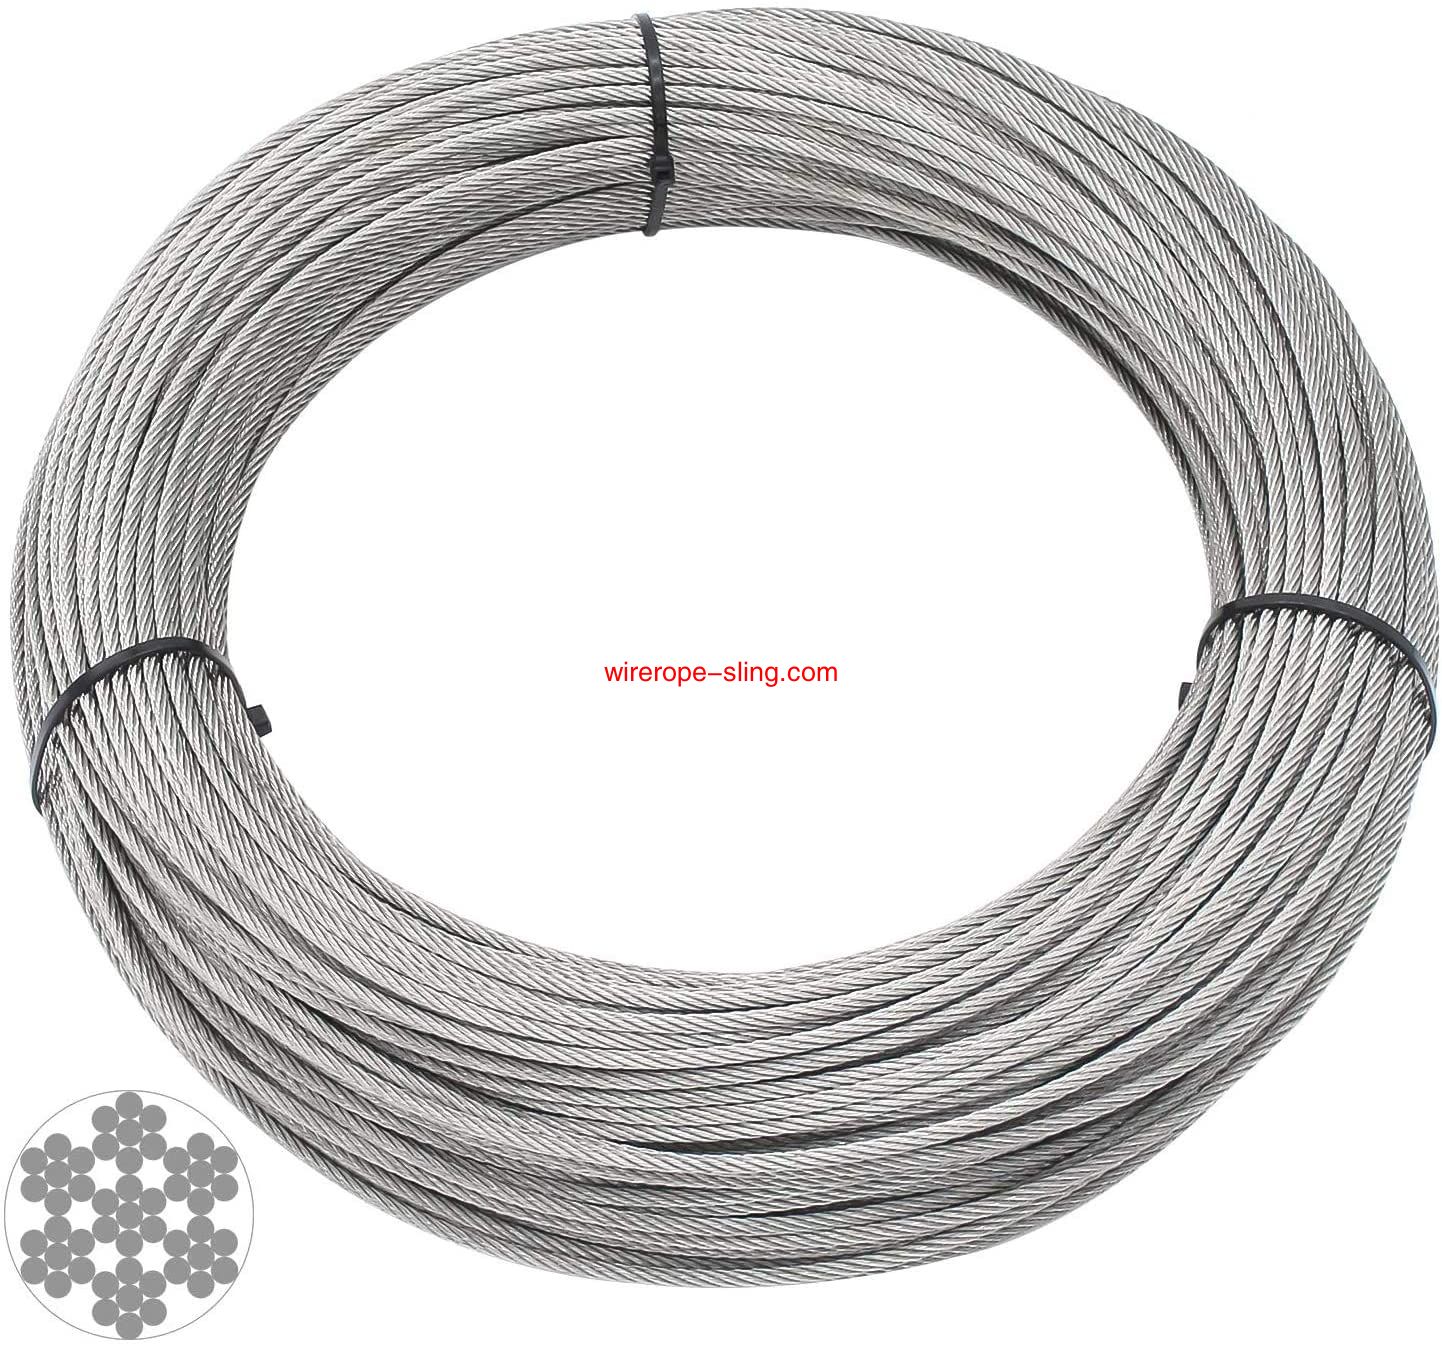 T316 Marin Grade 3mm Stainless Steel Aircraft Wire Rope Cable for Railing, Decking, DIY Balustrade, 100 Feet